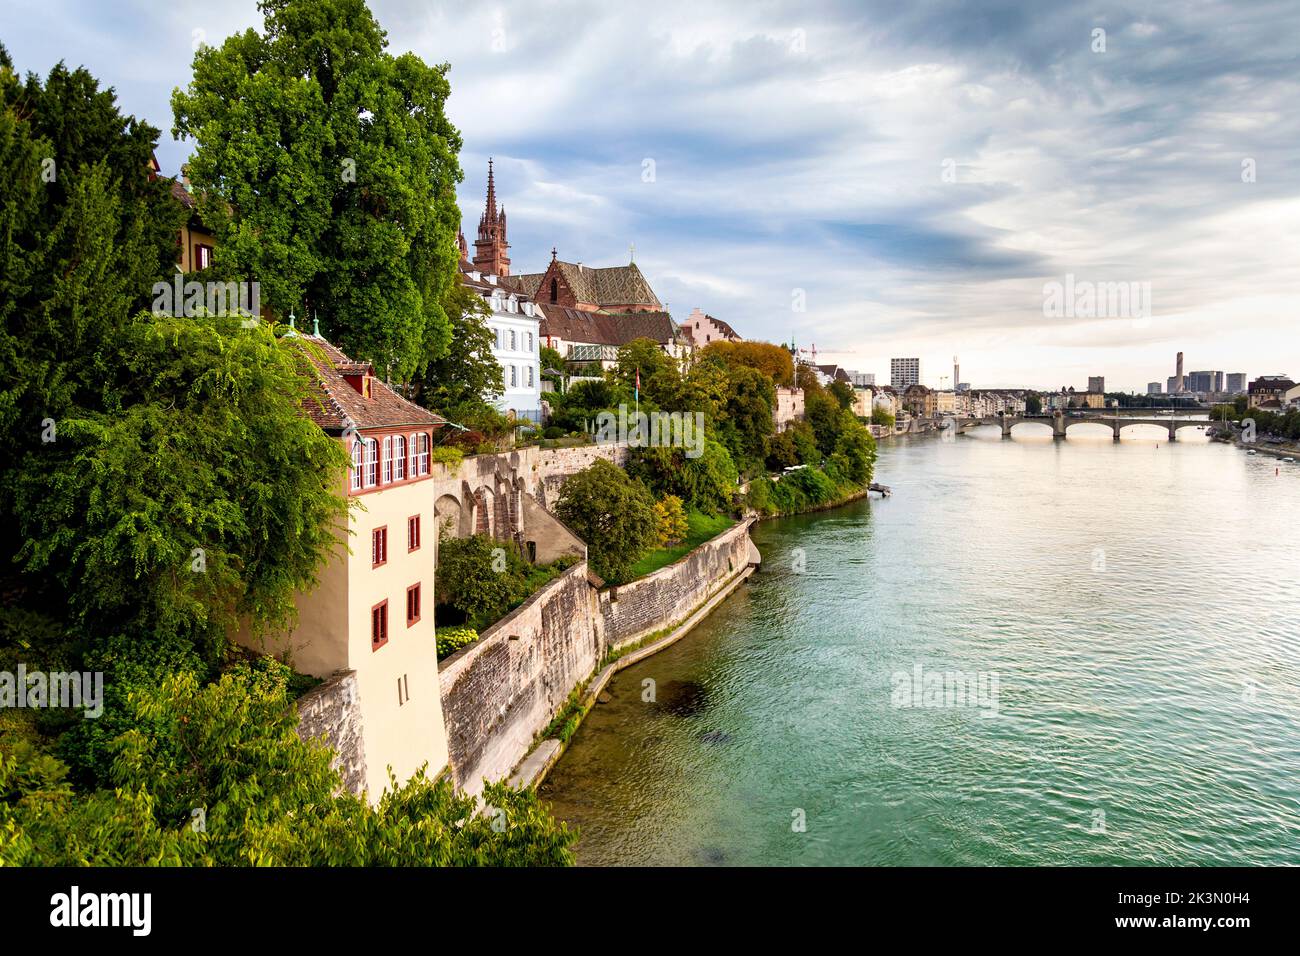 View of the old town (Altstadt Grossbasel), Basel, Switzerland Stock Photo